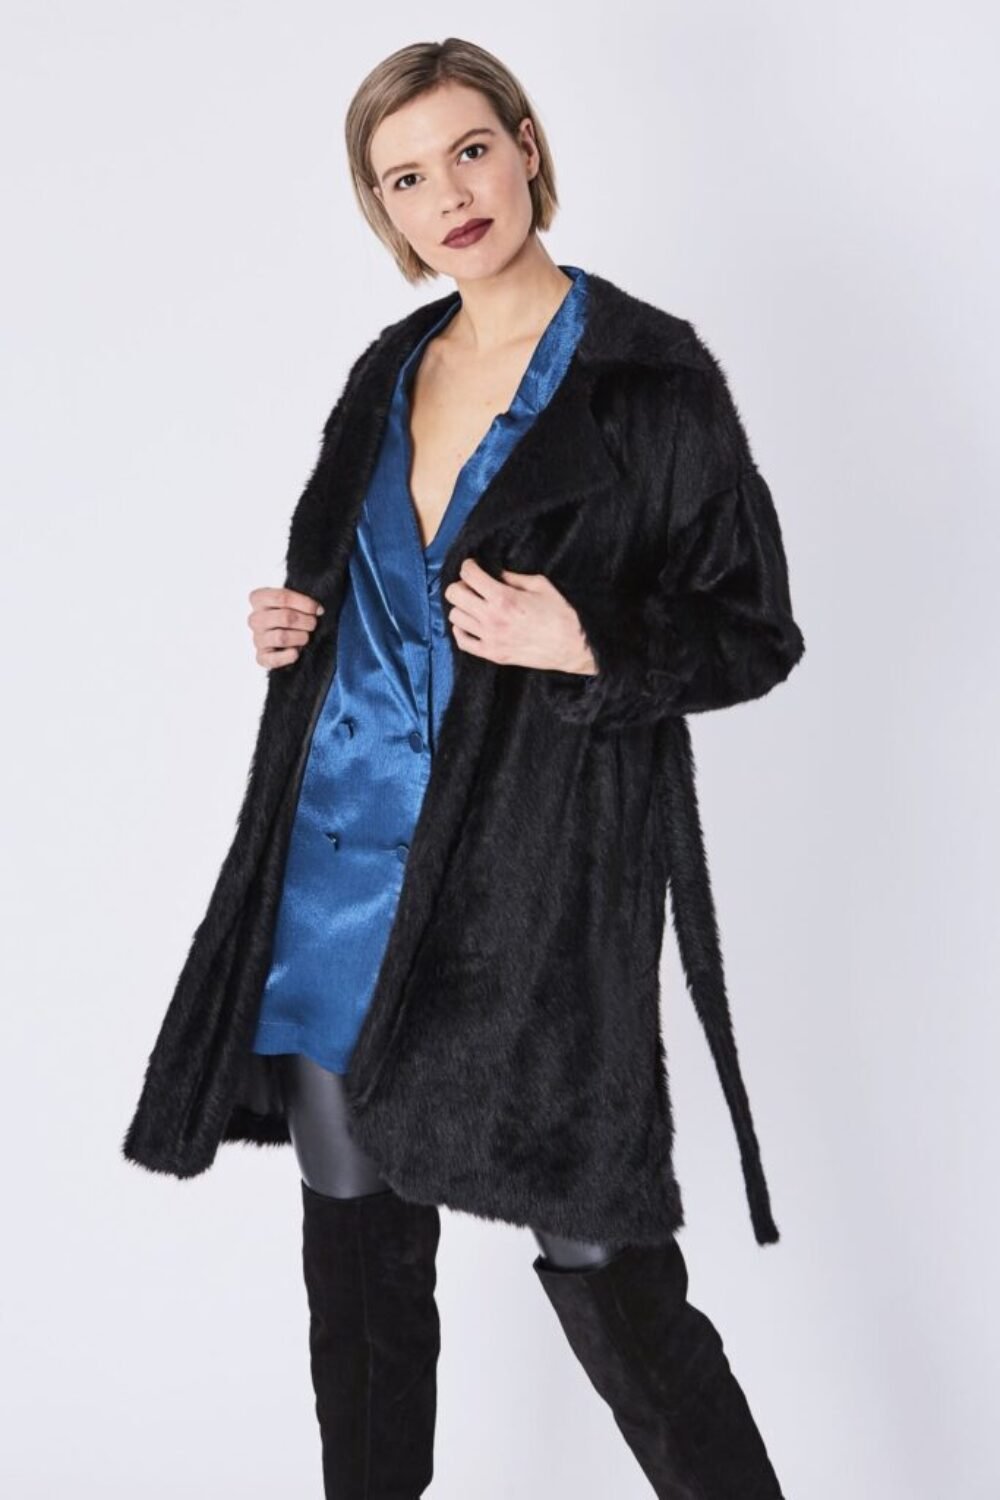 Shop Lux Black Faux Fur Coat and women's luxury and designer clothes at www.lux-apparel.co.uk